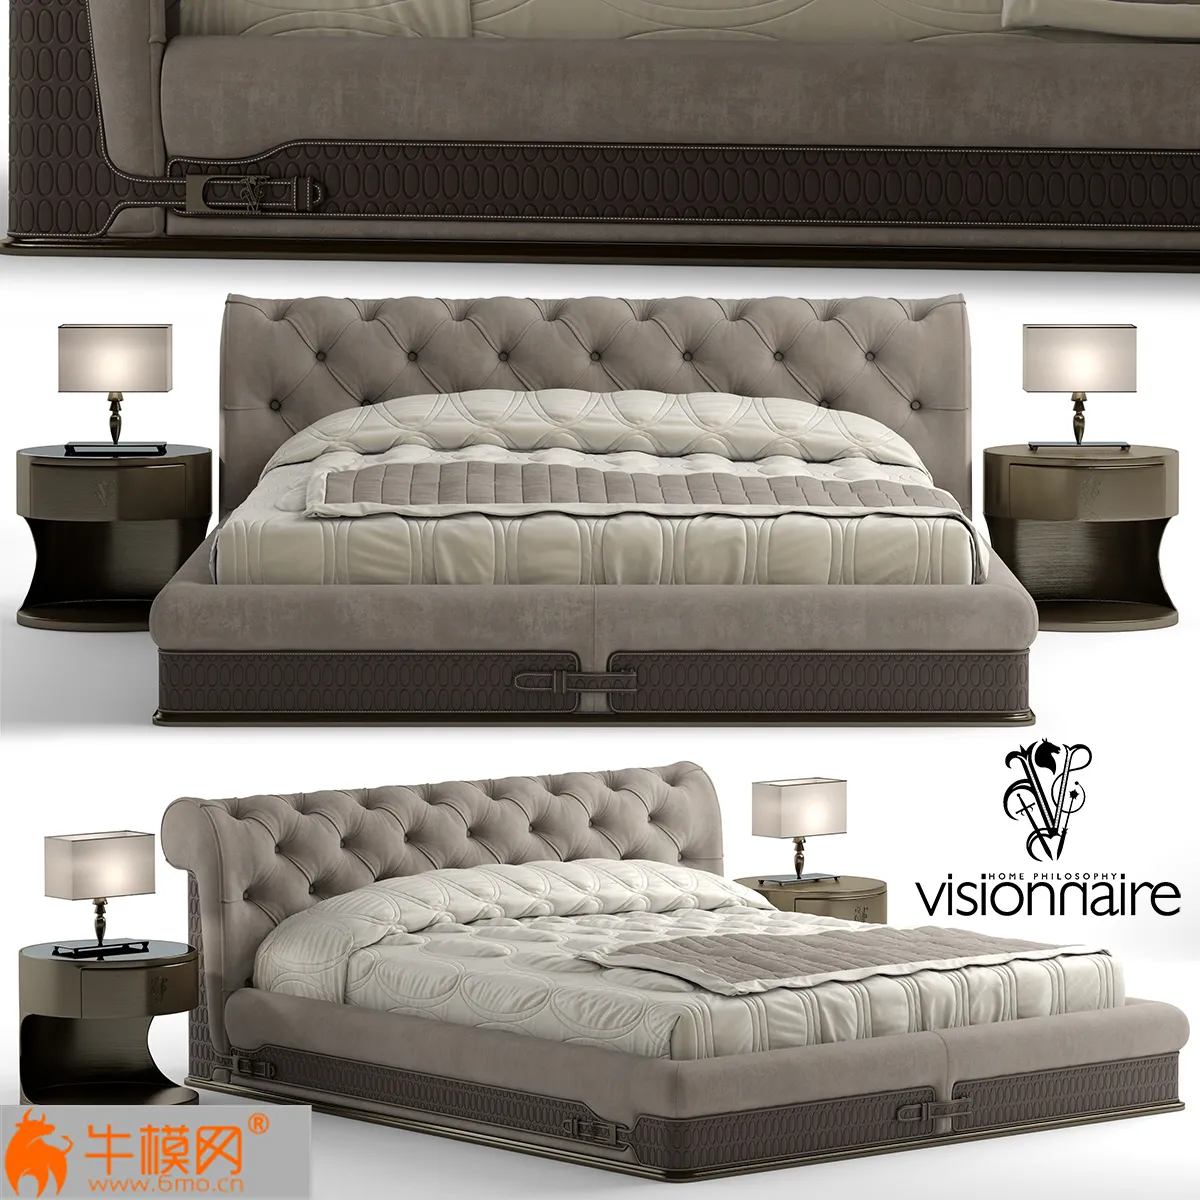 Bed visionnaire chester laurence – 3671